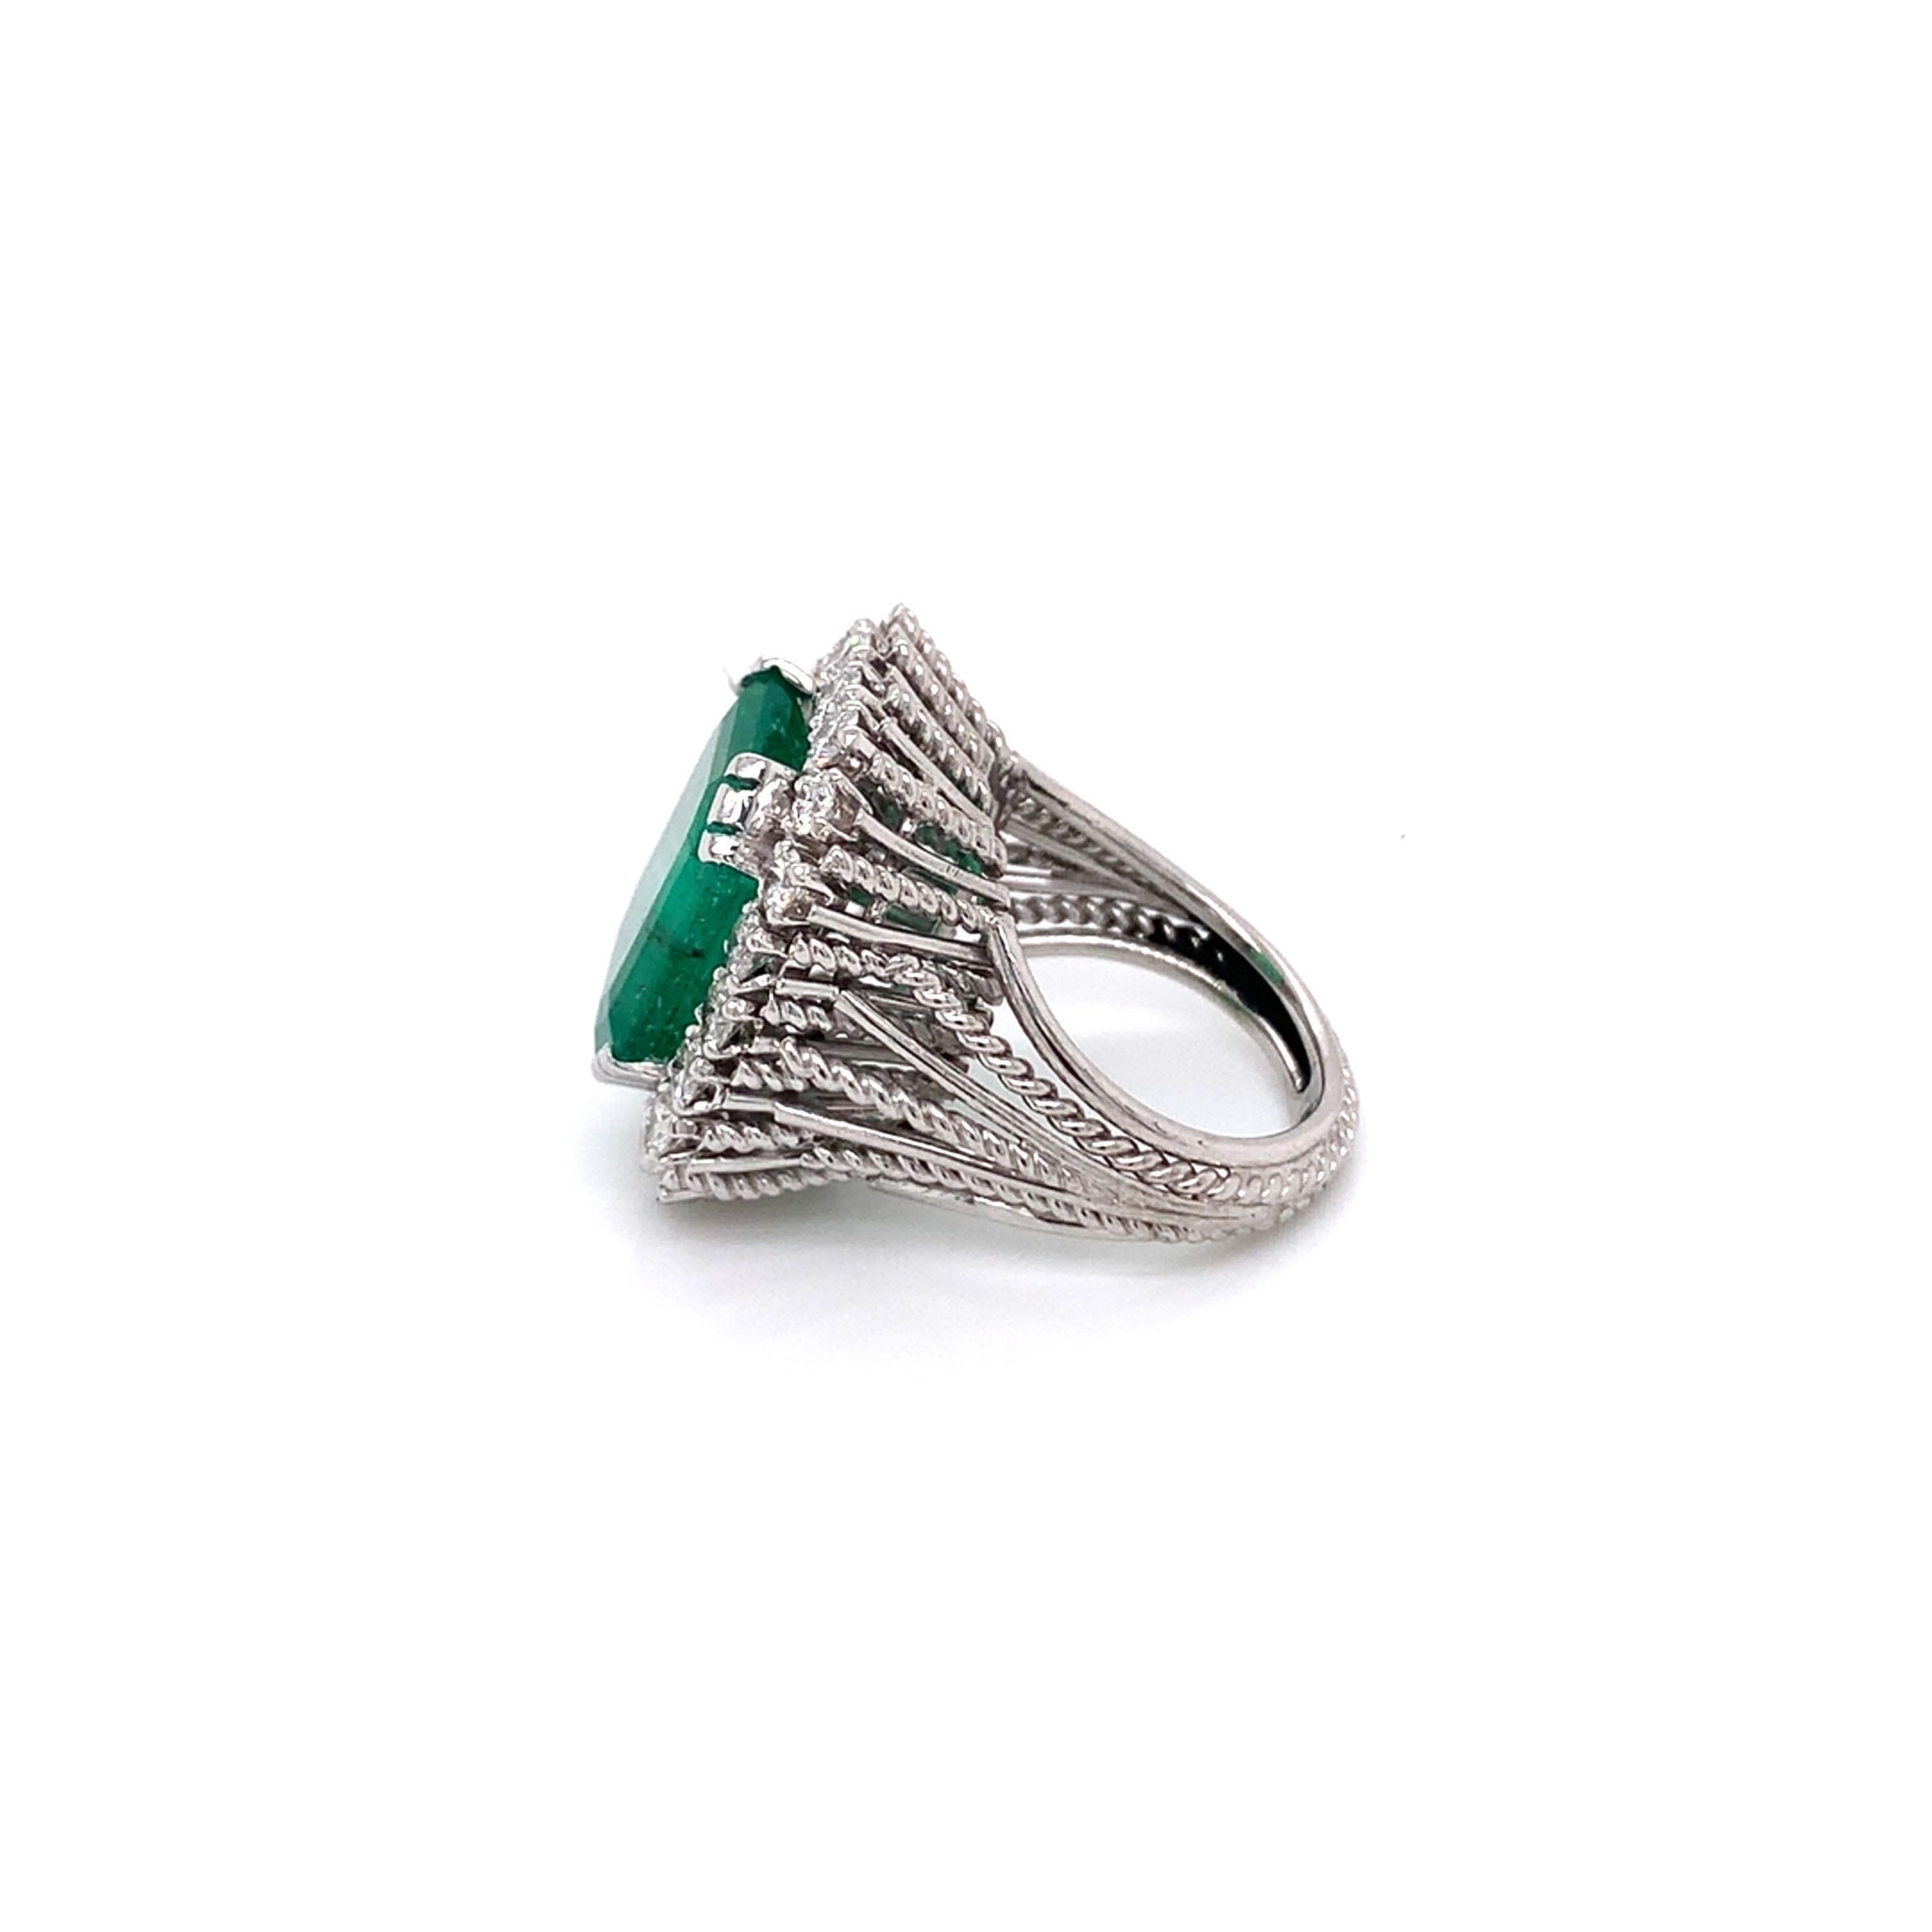 Antique Style Diamond & Emerald Cocktail Ring made with real/natural diamonds and GIA Certified Emerald. Emerald Total Weight: 7.95 carats. Diamond Total Weight: 1.60 carats. Diamond Color: G-H. Diamond Clarity: VS. Diamond Quantity: 20 brilliant